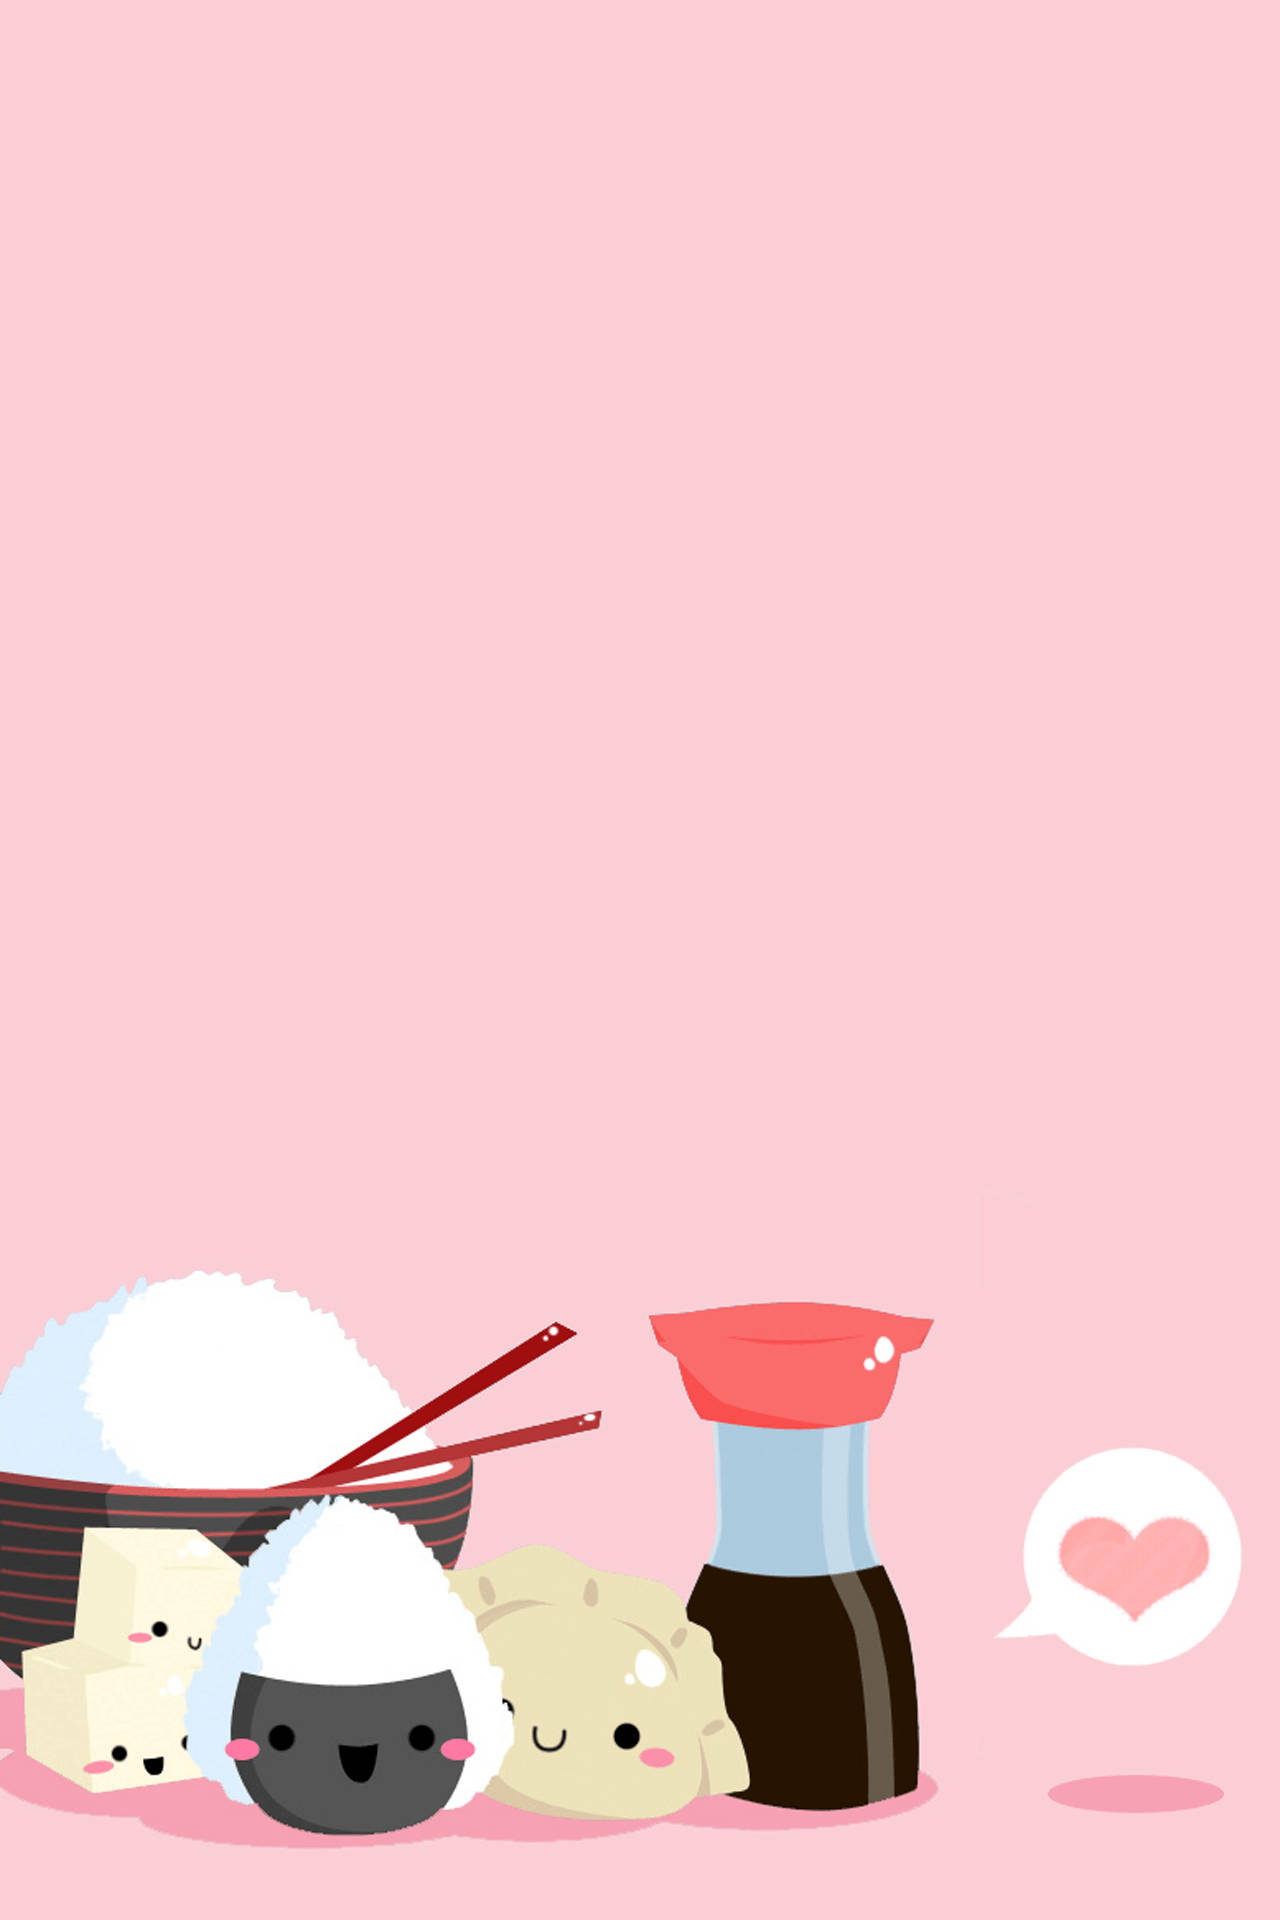 Kawaii Condiments For Iphone Wallpaper